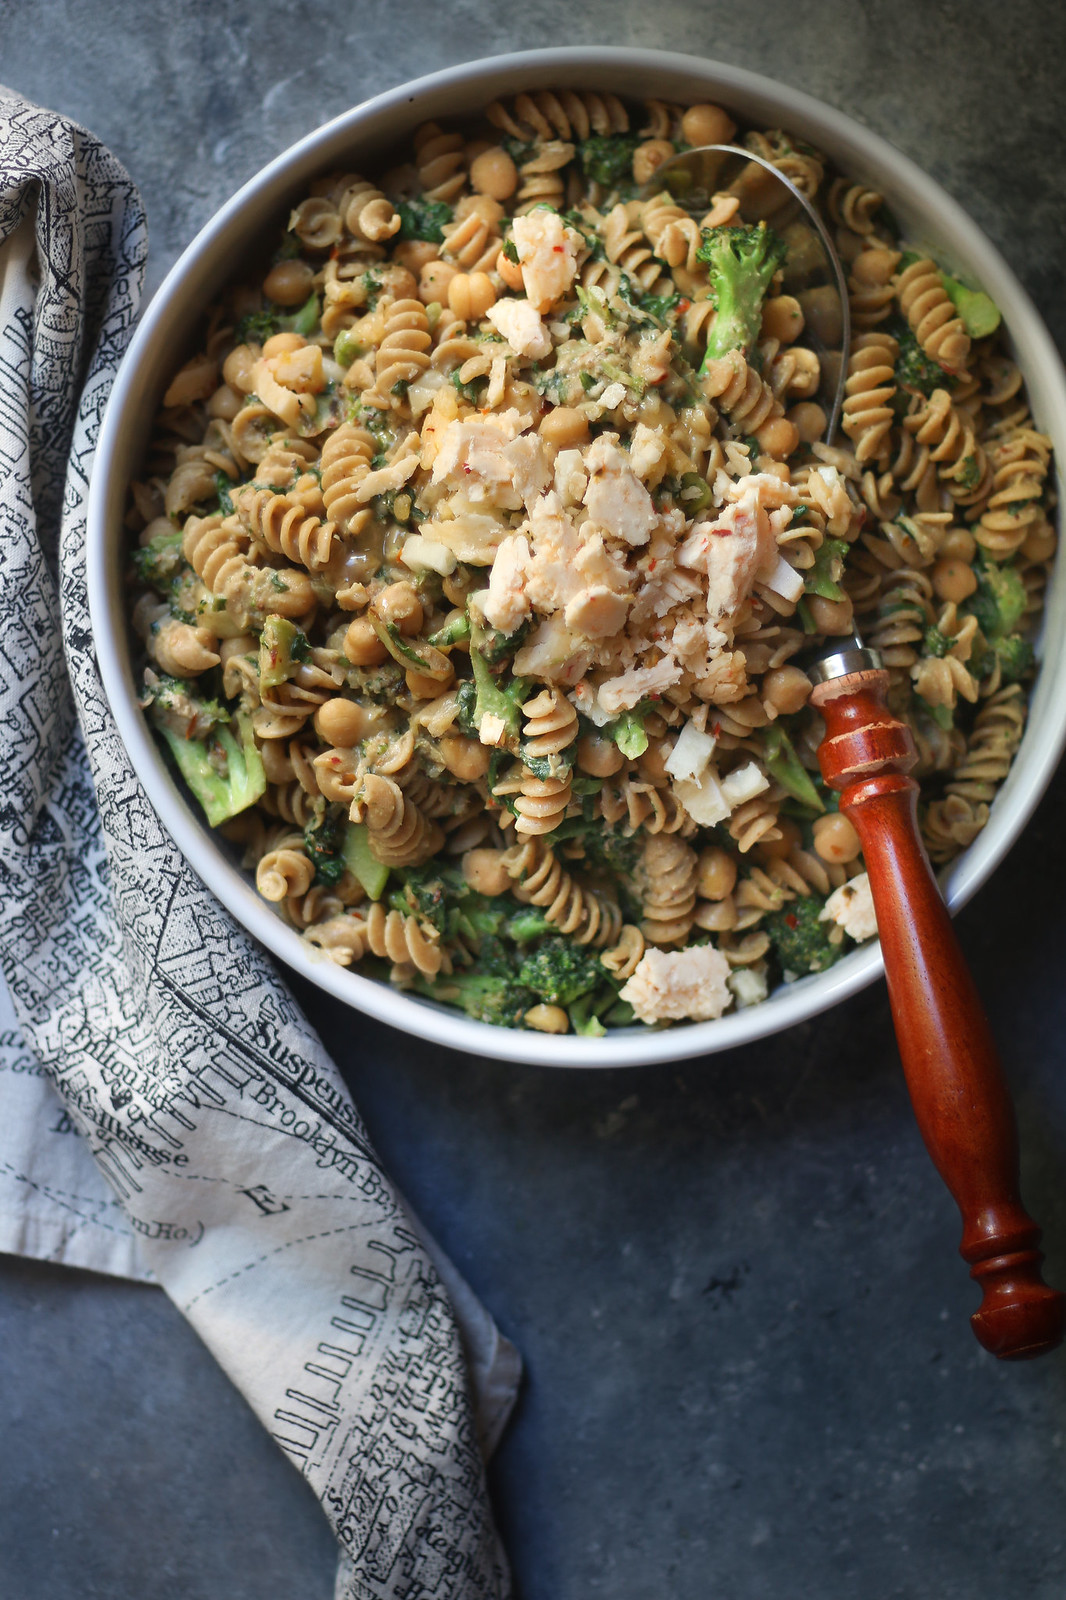 Butter Bean Walnut Hummus and Broccoli-Spinach Butter Bean Pasta |foodfashionparty|